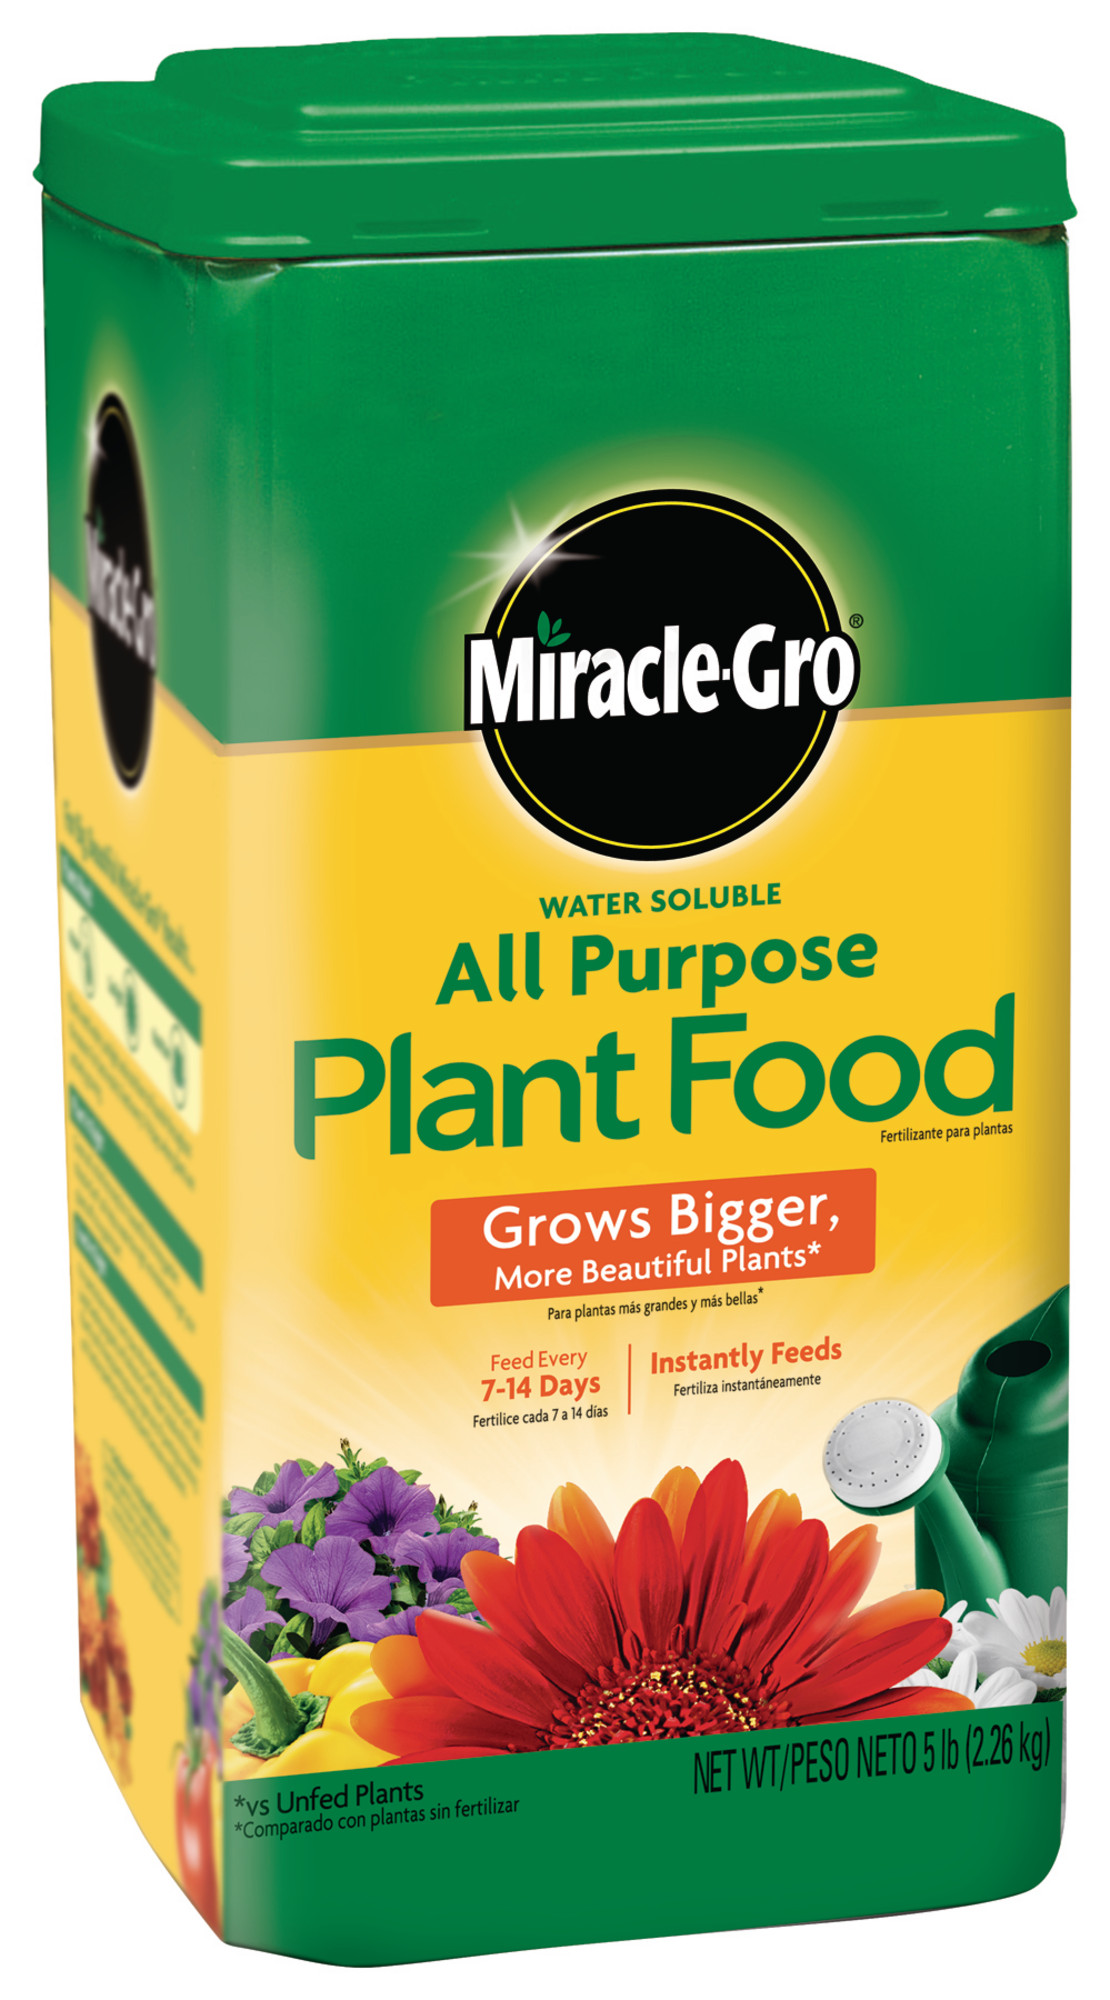 Miracle-Gro Water Soluble All Purpose Plant Food, 5 lbs. - image 1 of 16